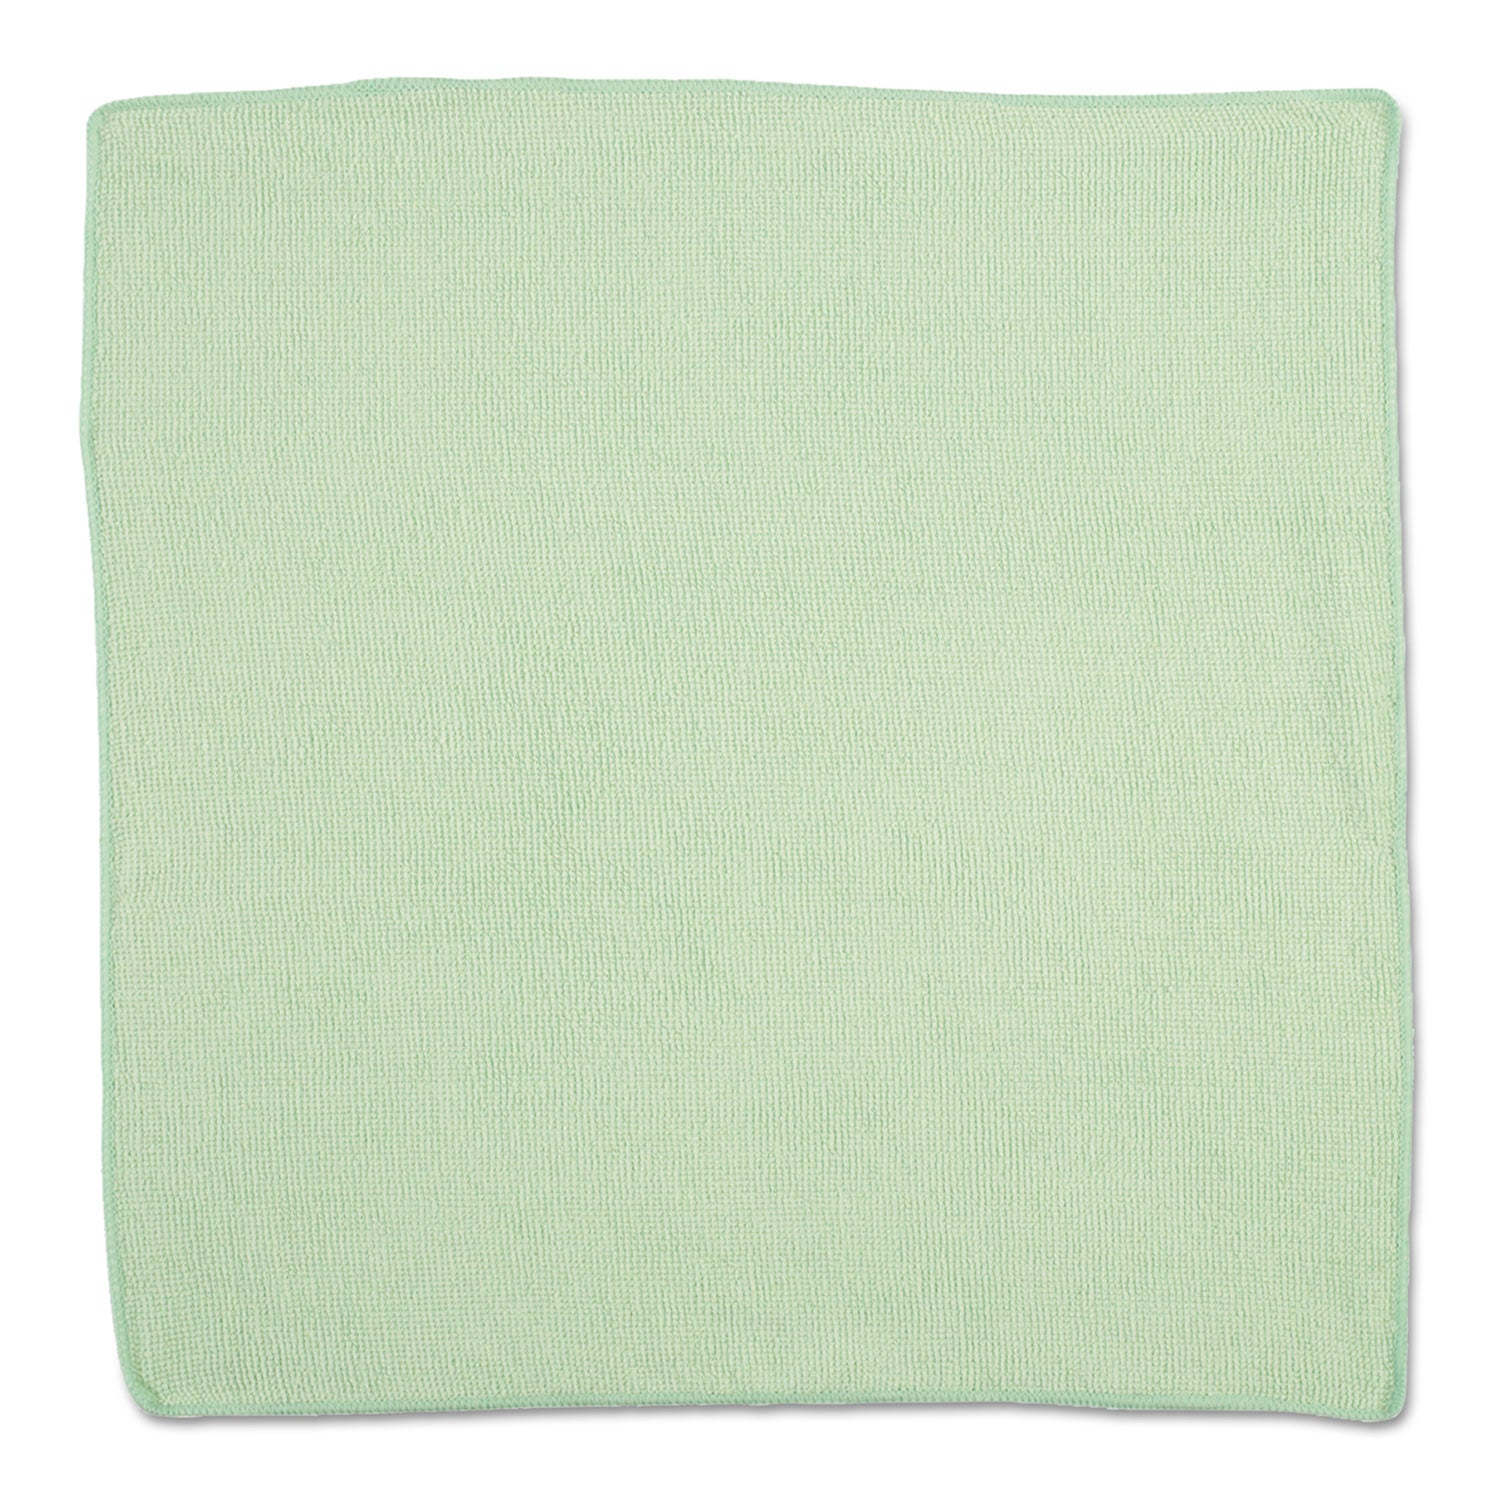 microfiber-cleaning-cloths-16-x-16-green-24-pack_rcp1820582 - 1